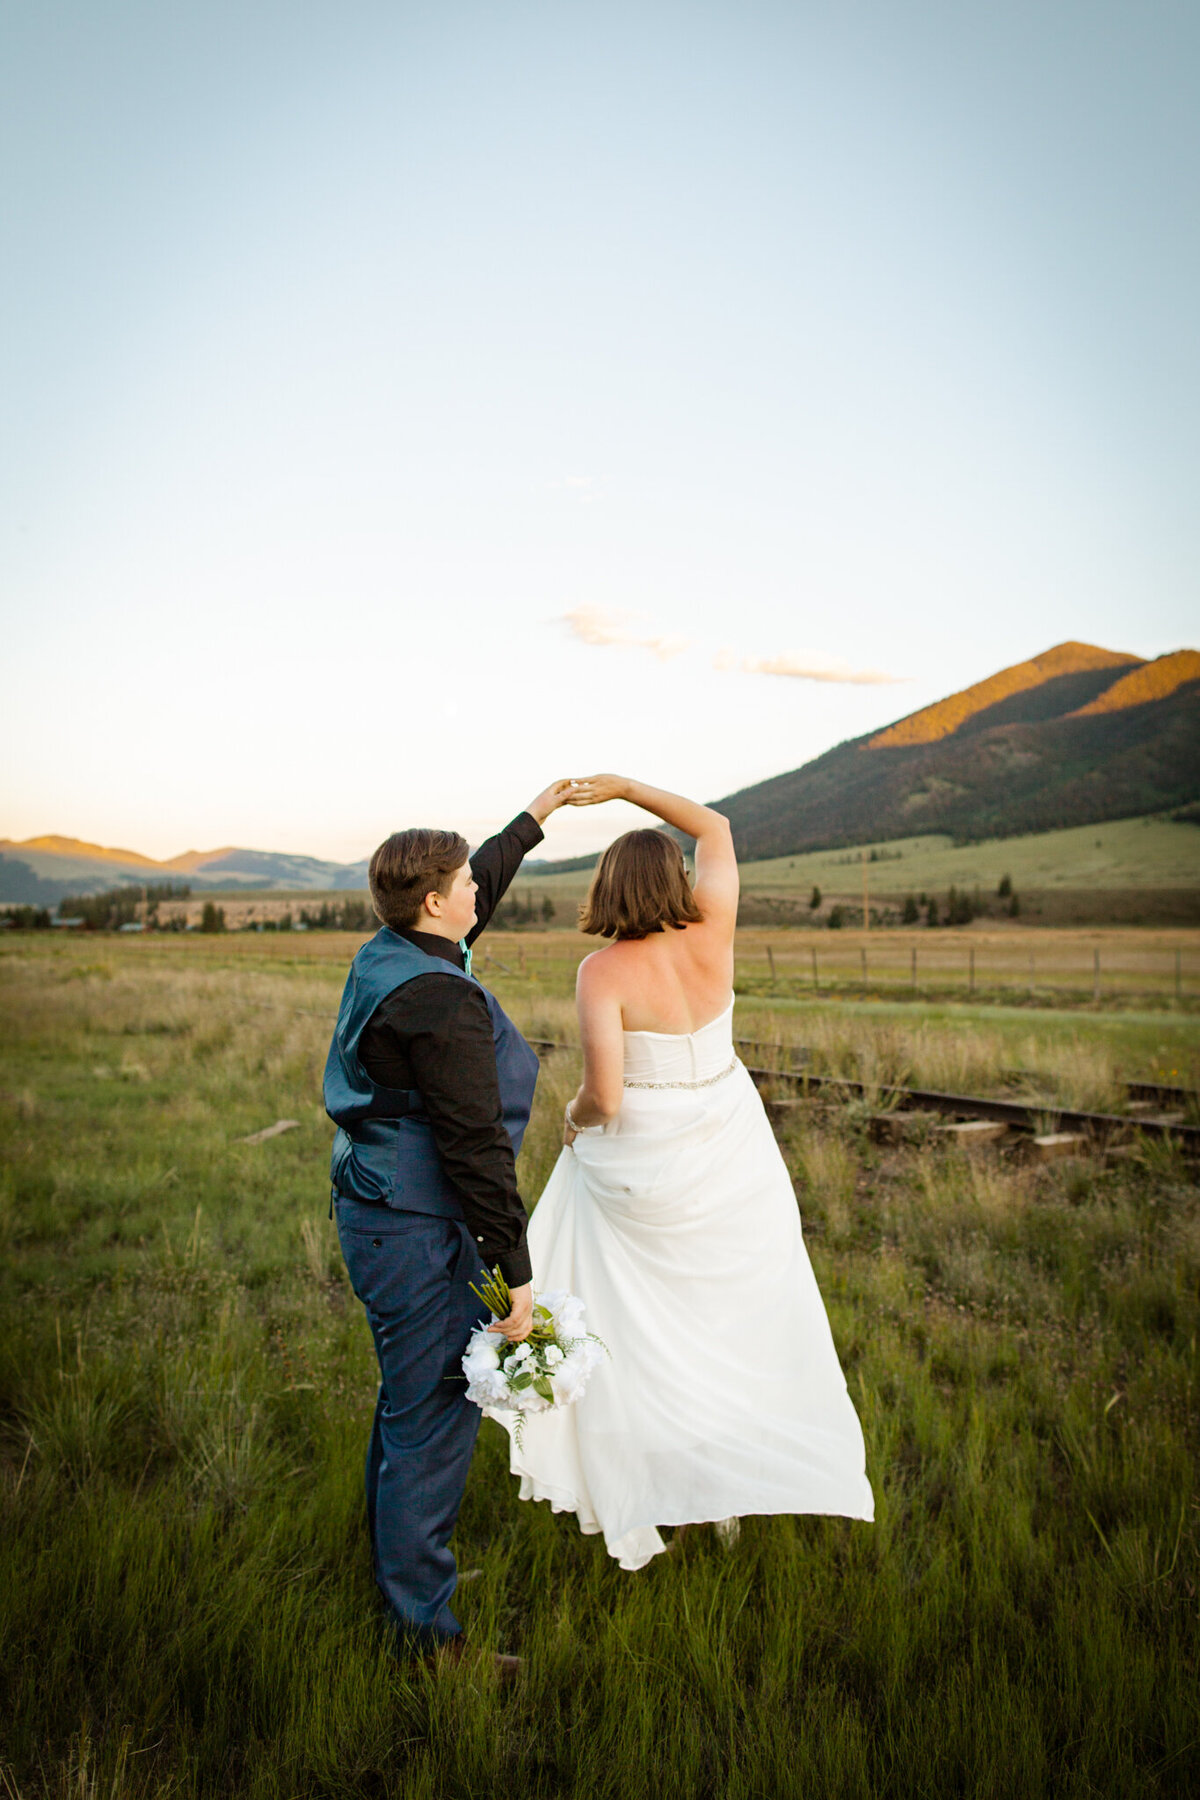 Couple spins in an open field during their wedding day